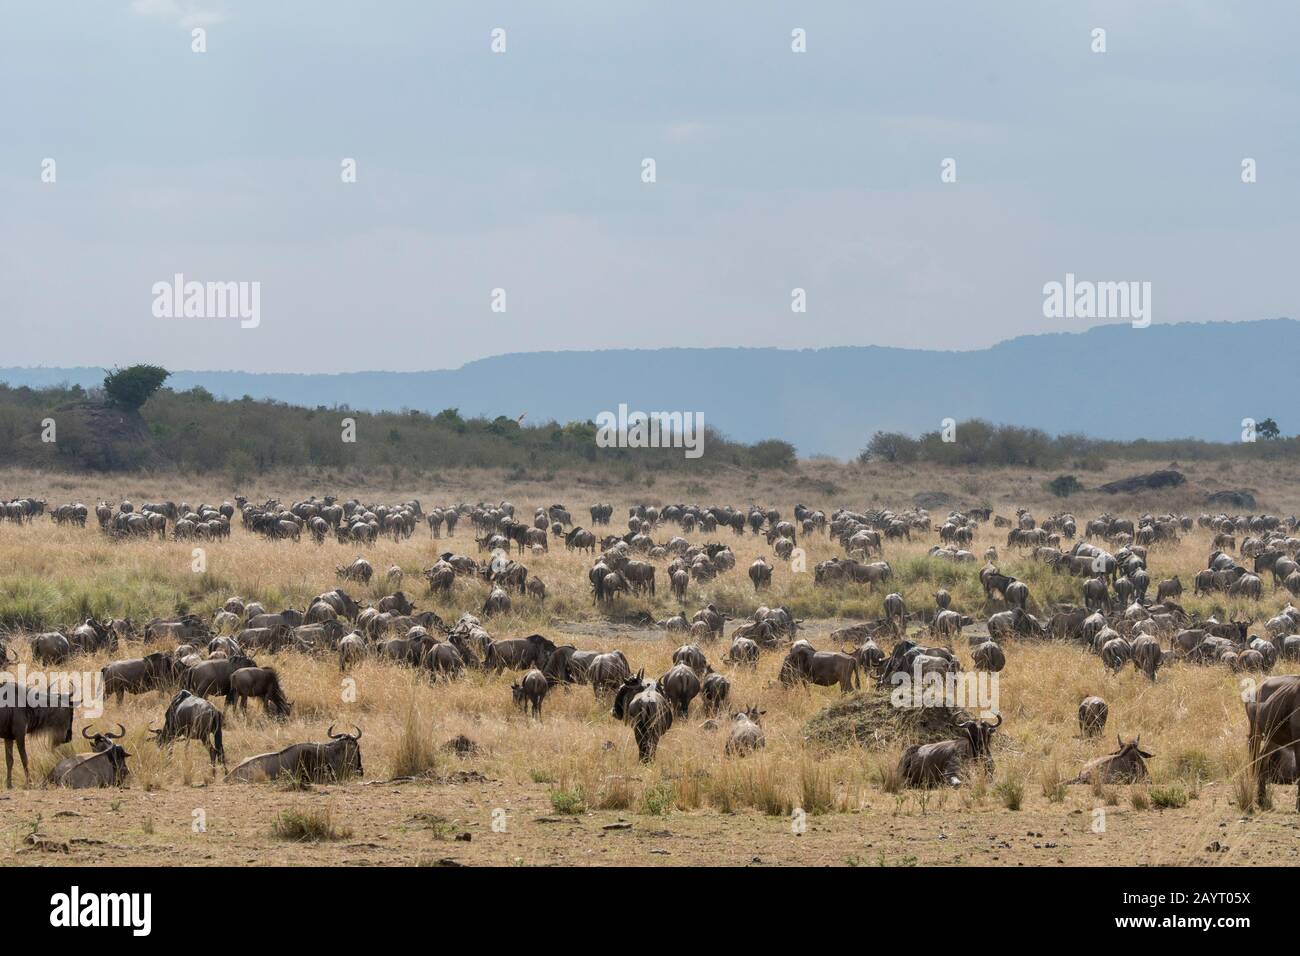 Wildebeests, also called gnus or wildebai, grazing while migrating through the grasslands towards the Mara River in the Masai Mara National Reserve in Stock Photo